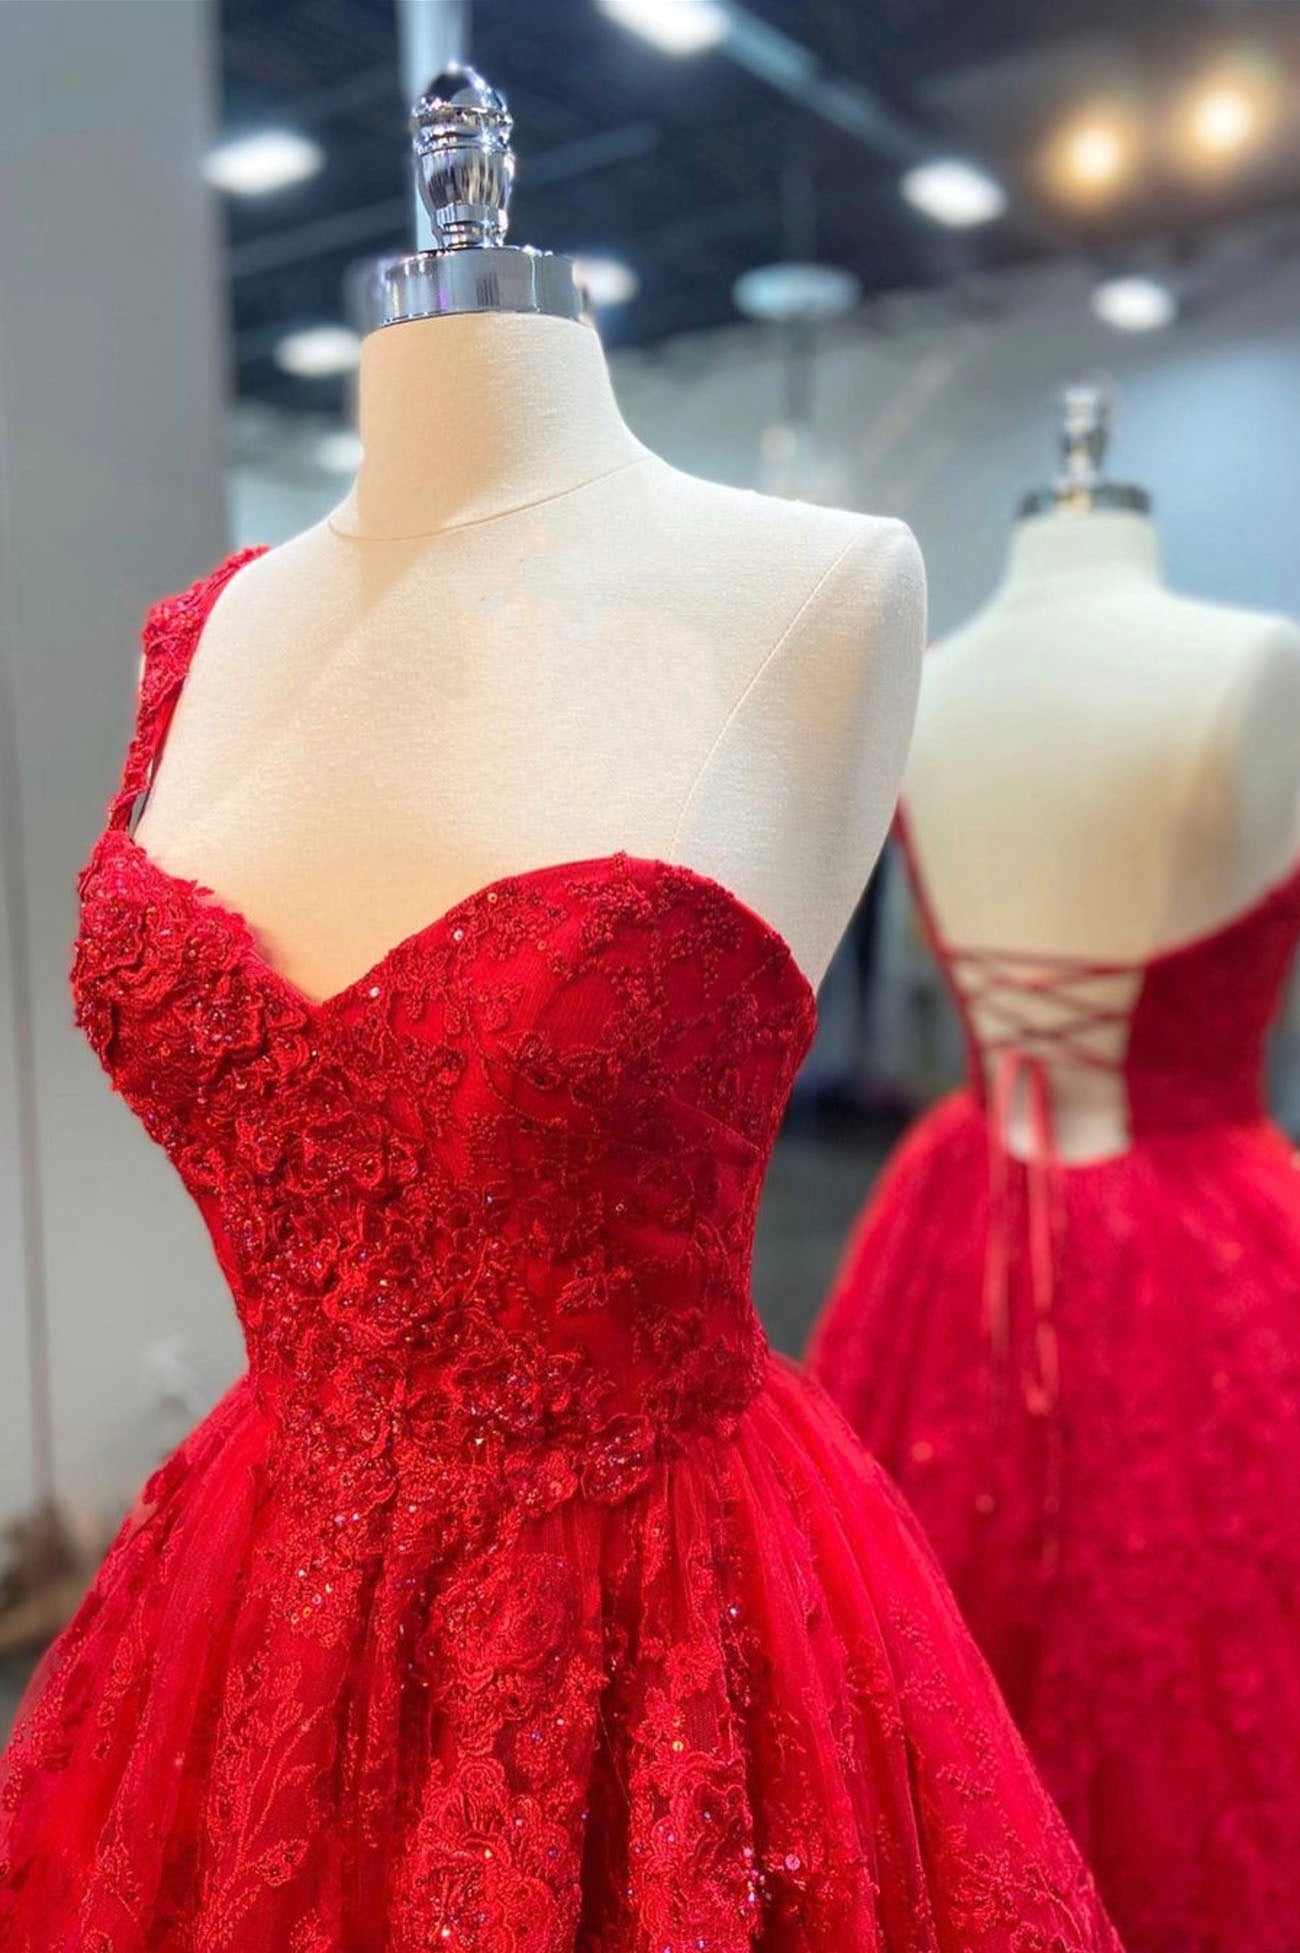 Party Dresses Pink, Red Lace Long A-Line Prom Dress, One Shoulder Evening Dress